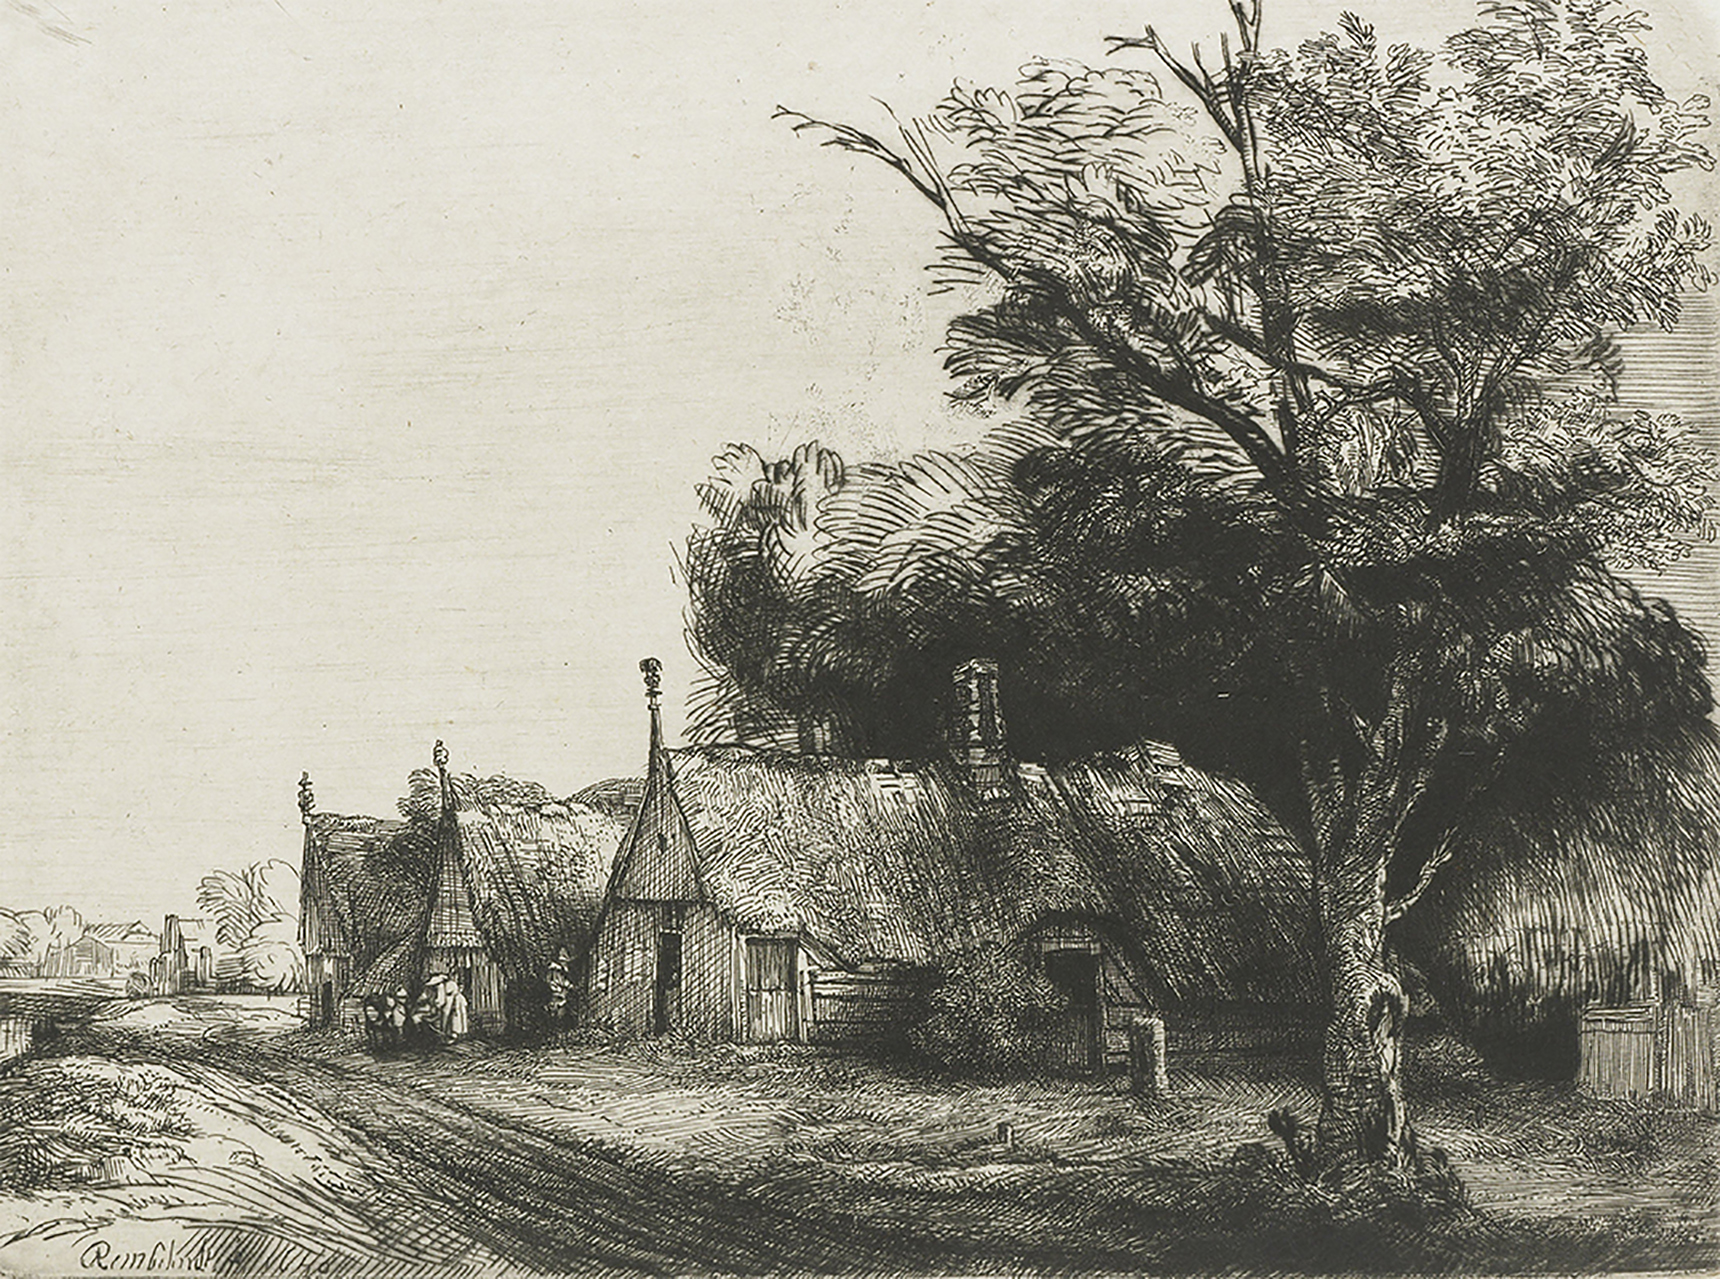 Rembrandt, three farmhouses on a road, 1650, etching/dry needle. © Rembrandt House Museum